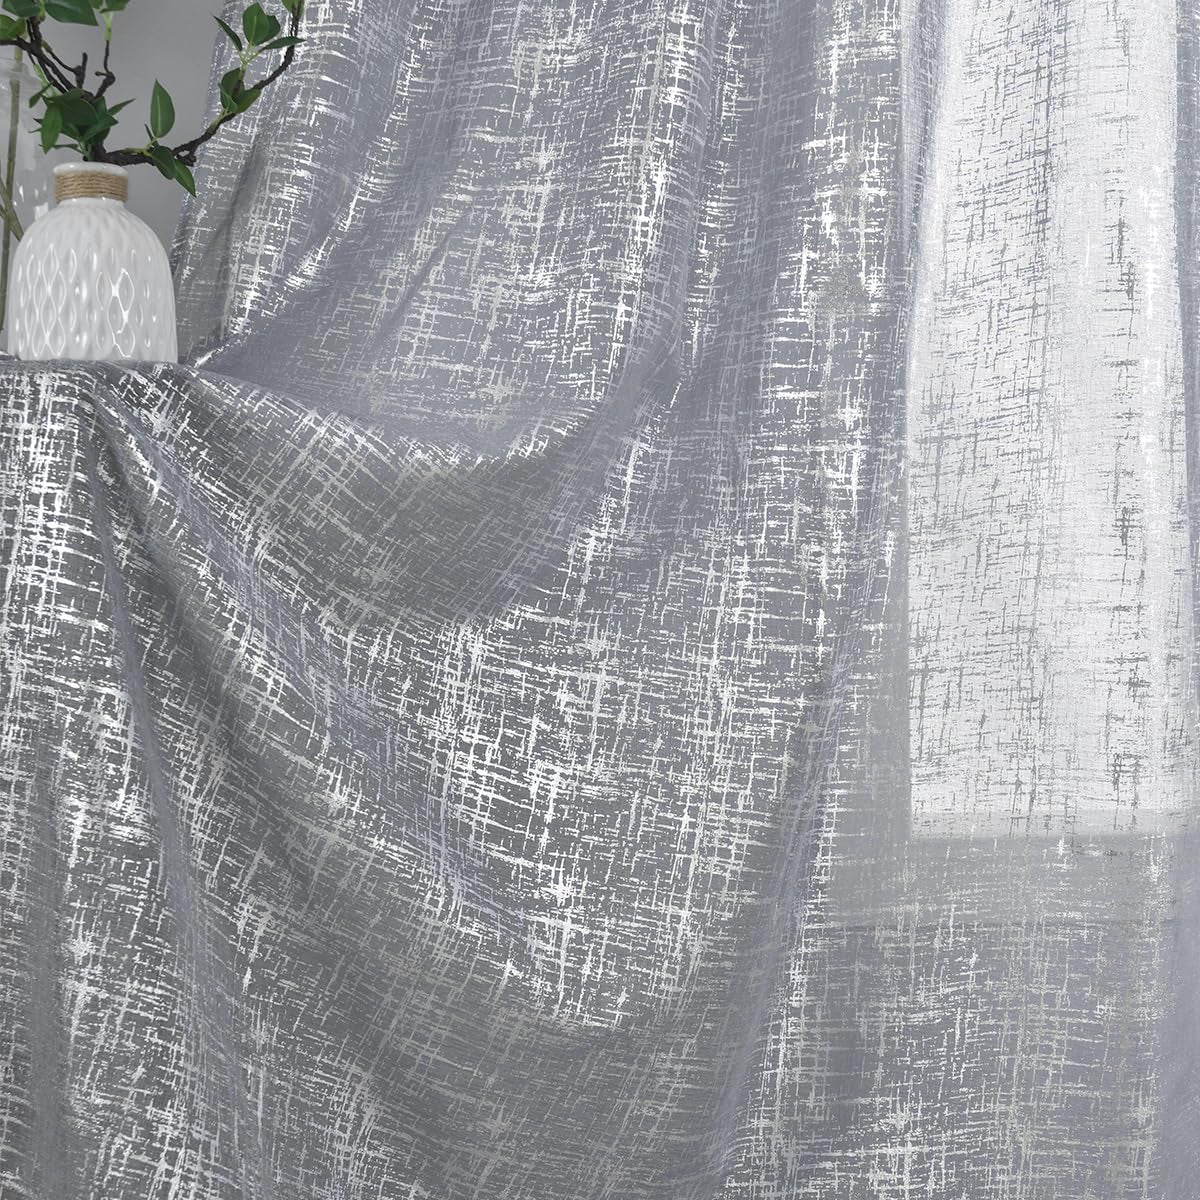 TERLYTEX White Gold Sheer Curtains 84 Inch Length, Metallic Gold Foil Cross Hatch Sparkle Sheer Curtains for Living Room, Rod Pocket Privacy Shimmer Curtains, 52 X 84 Inch, 2 Panels, Gold White  TERLYTEX Silver Grey W52 X L84 Inch|Pair 